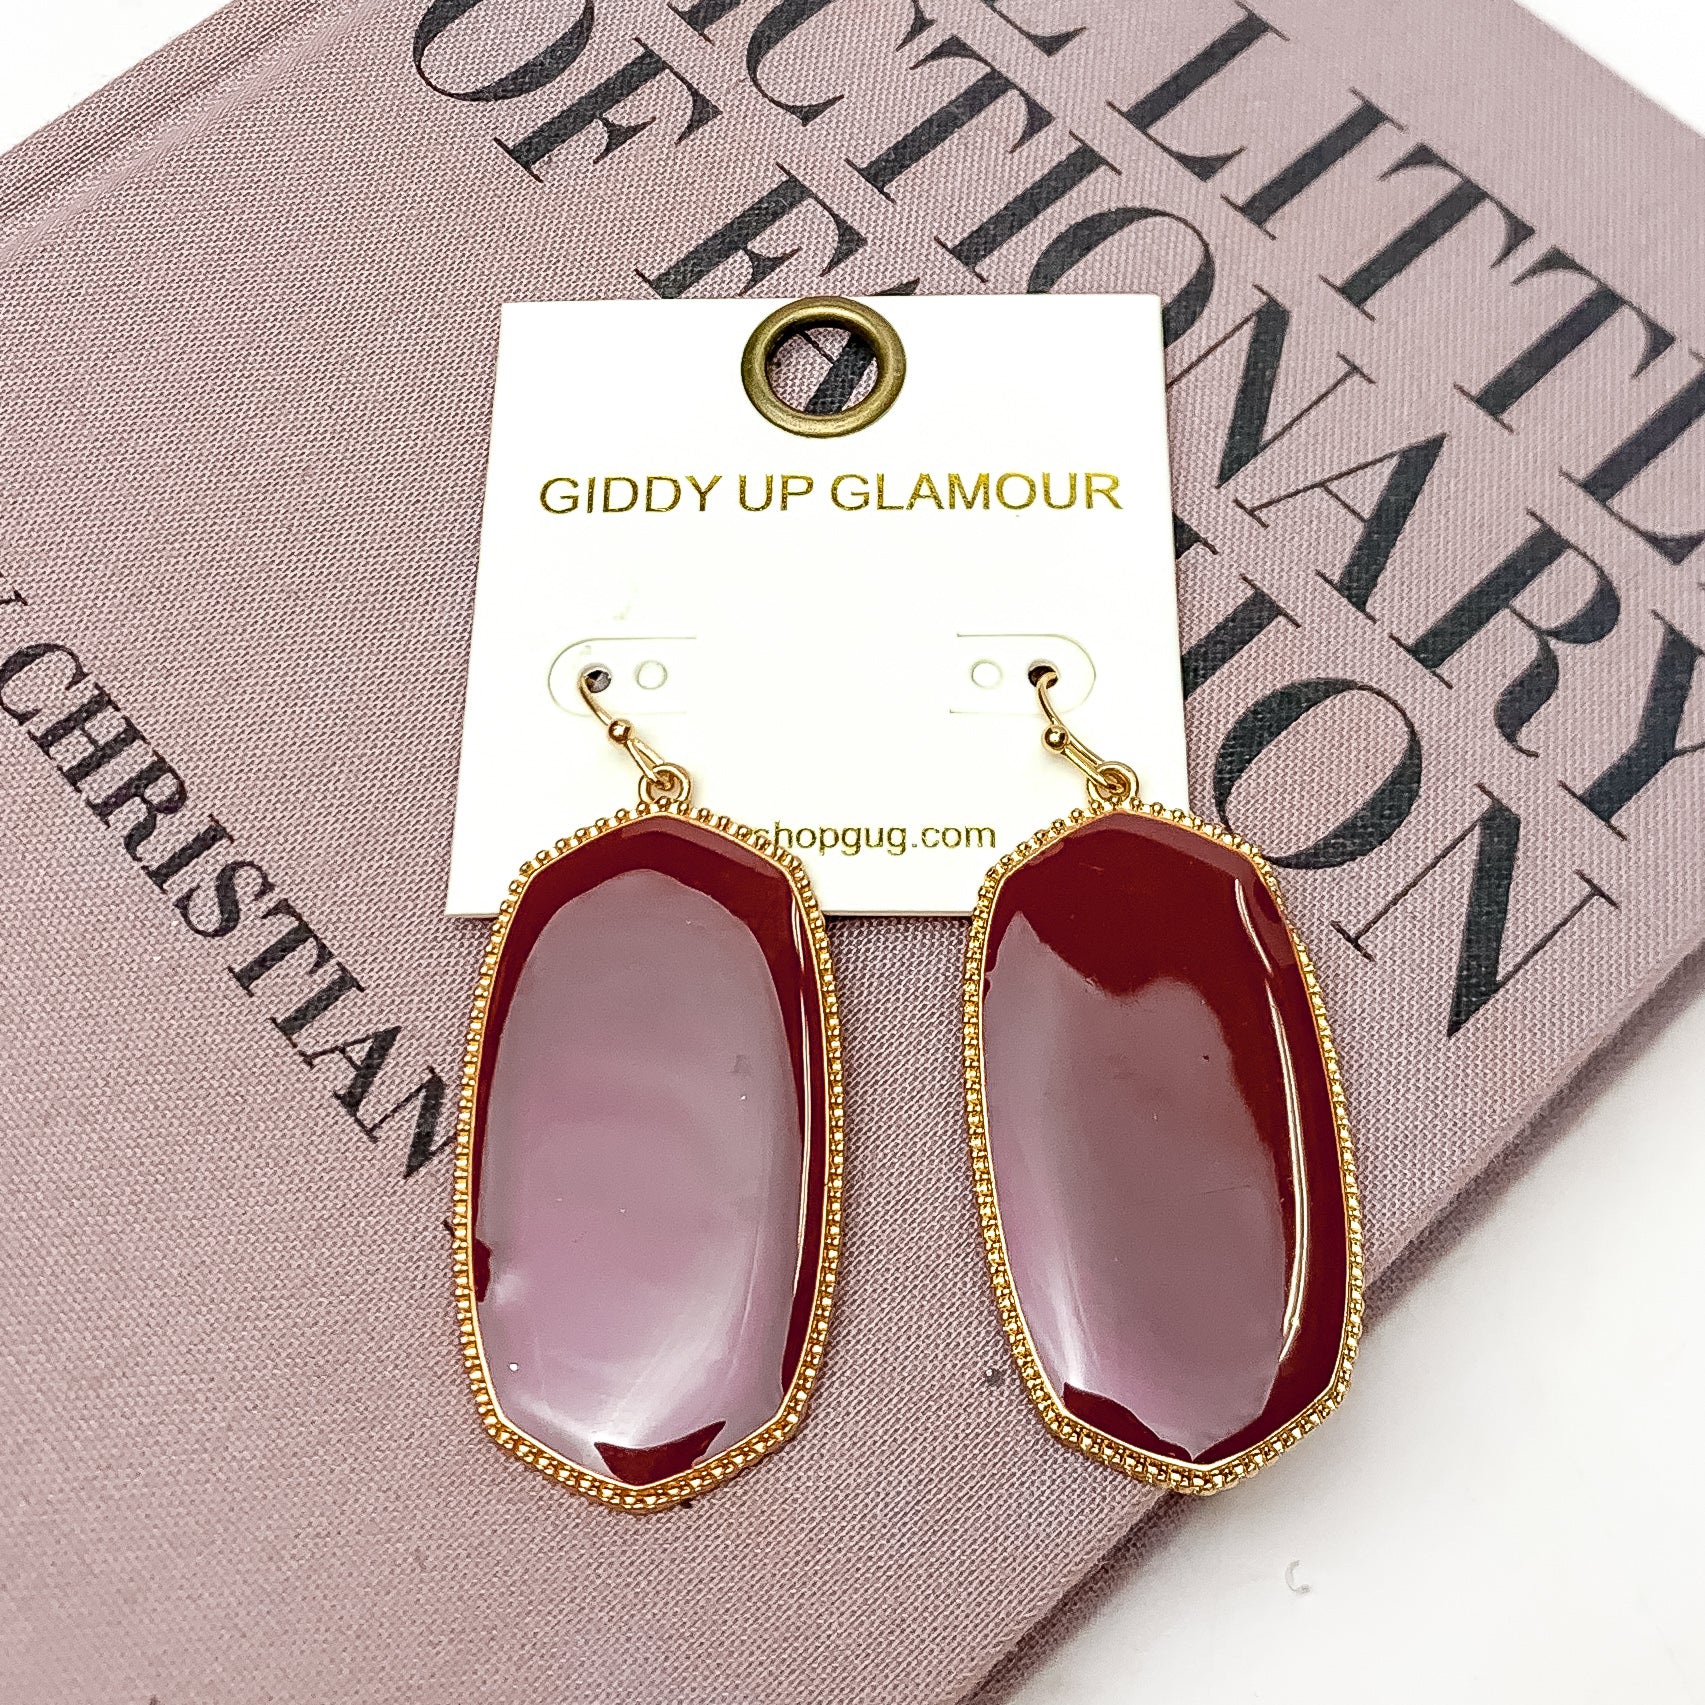 Southern Charm Oval Earrings in Maroon. These earrings are laying on a pink book with a white background behind the book.